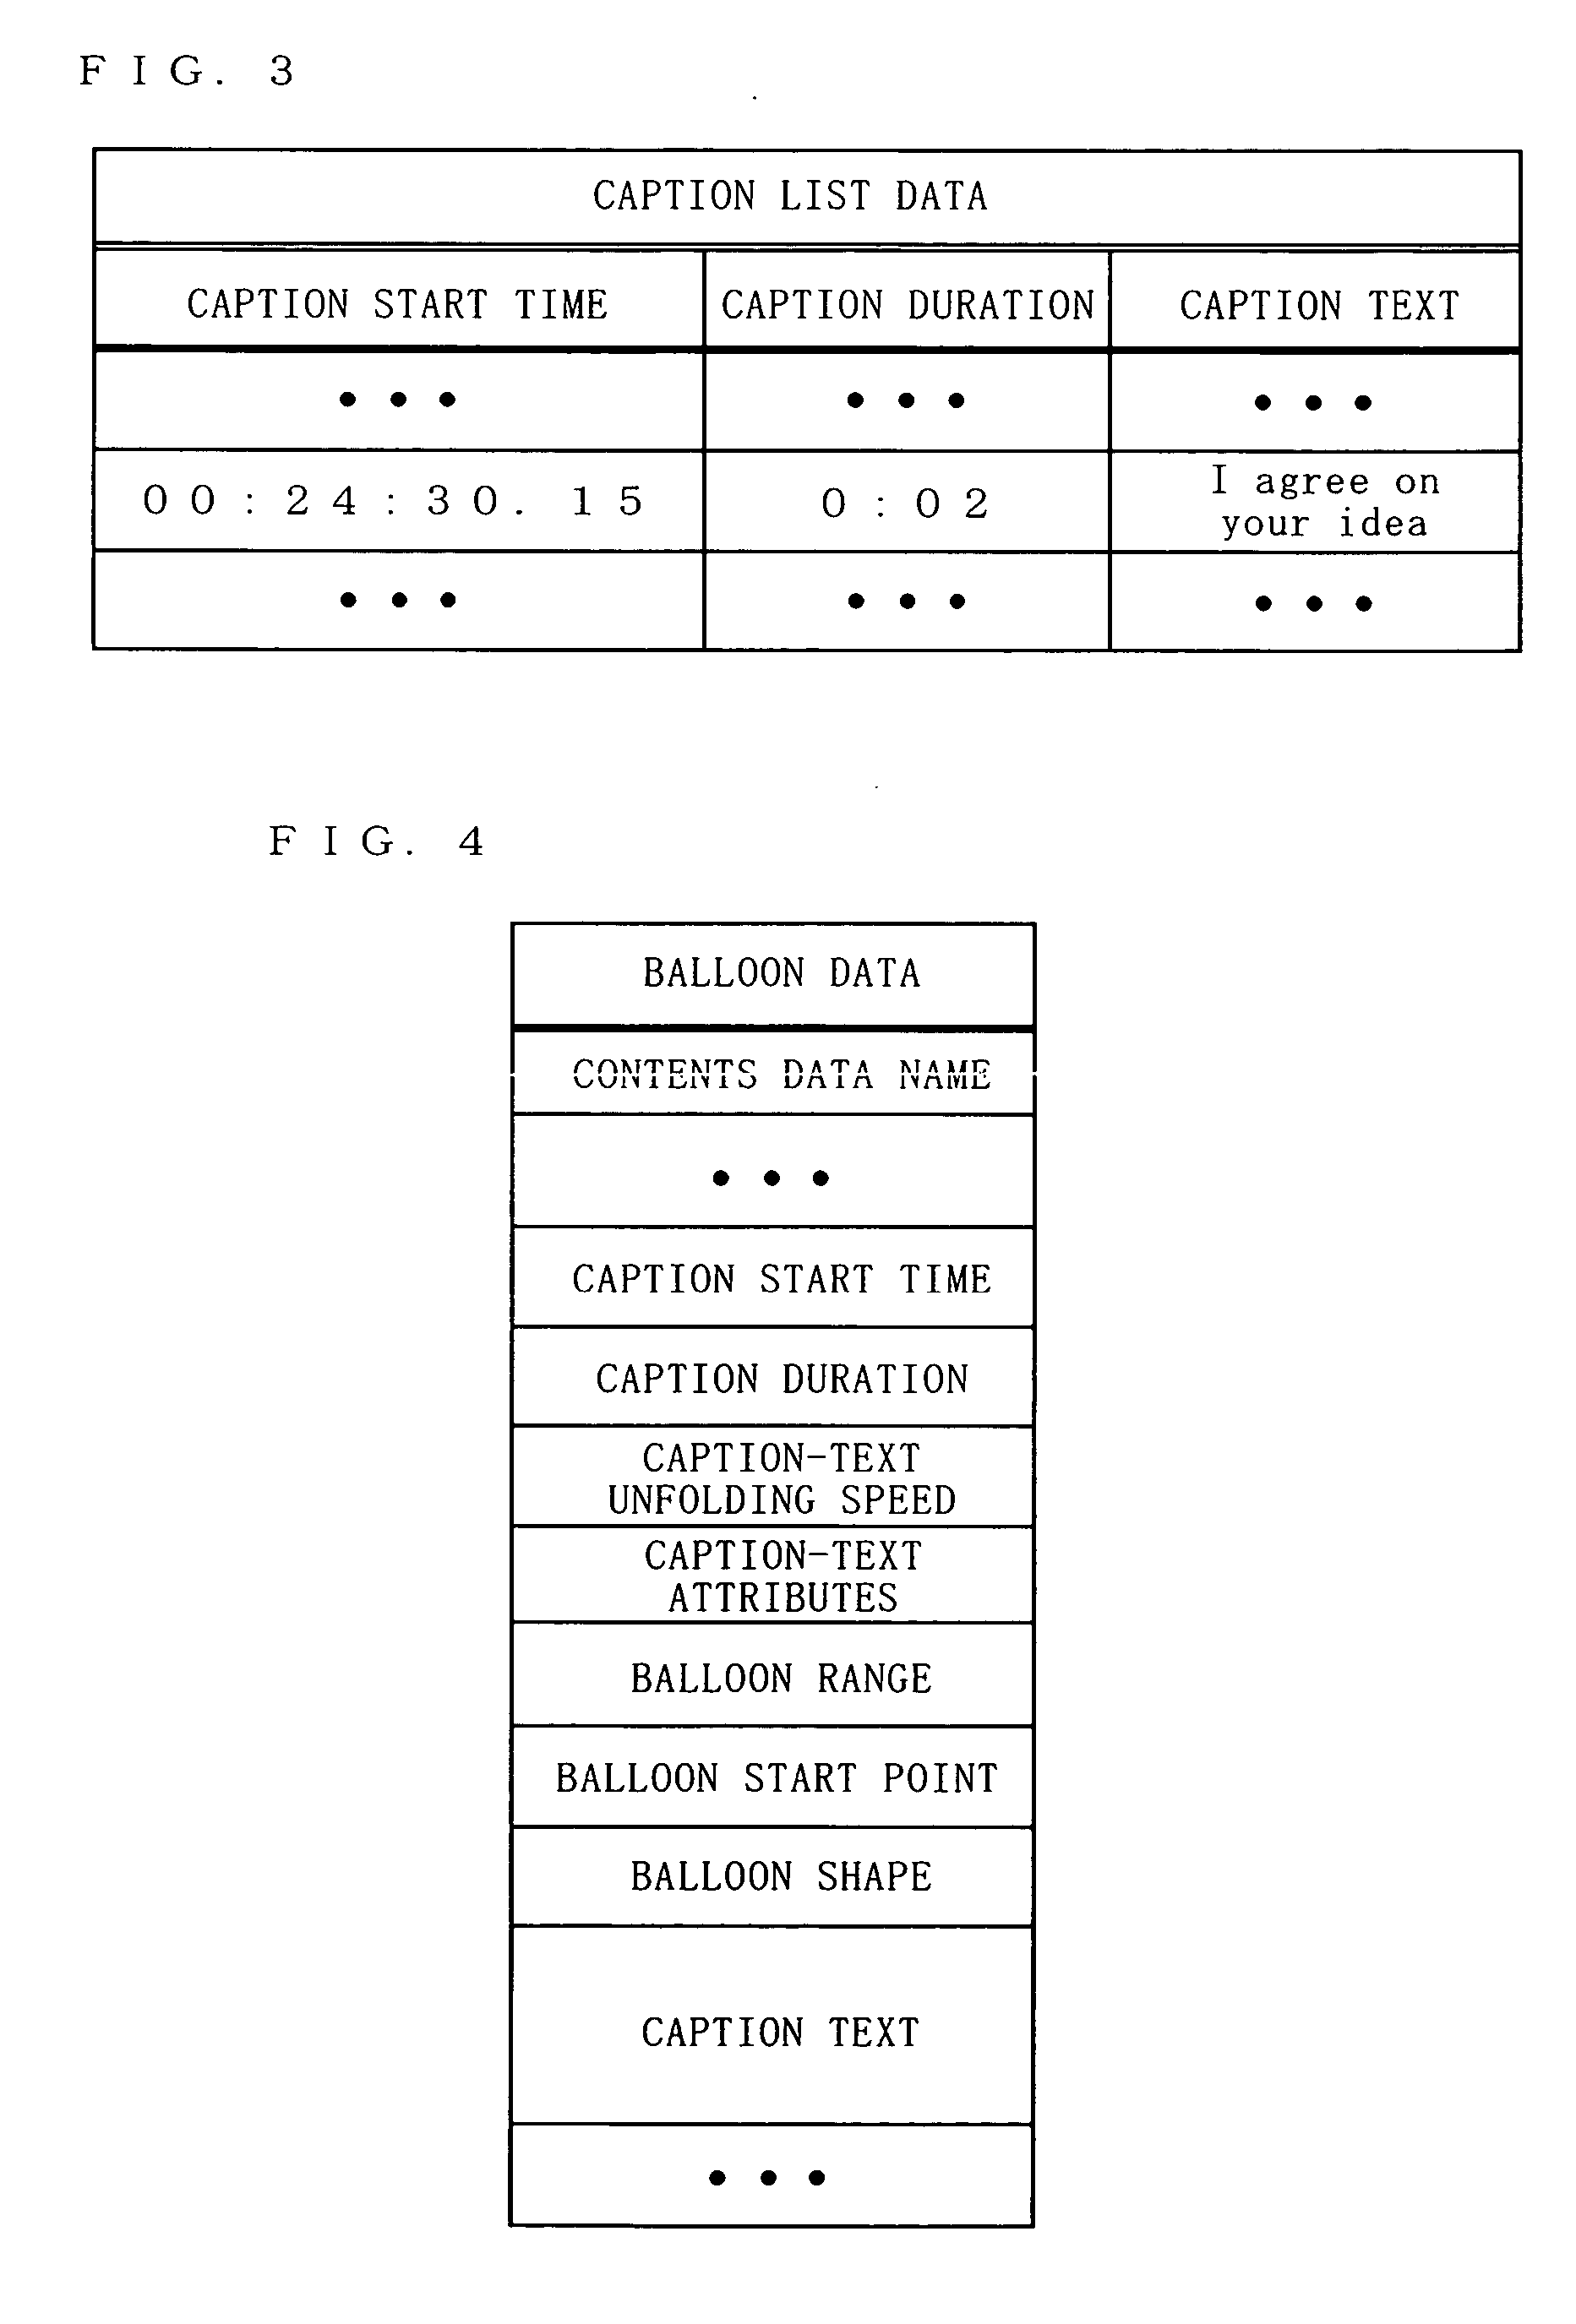 Apparatus for generating video contents with balloon captions, apparatus for transmitting the same, apparatus for playing back the same, system for providing the same, and data structure and recording medium used therein